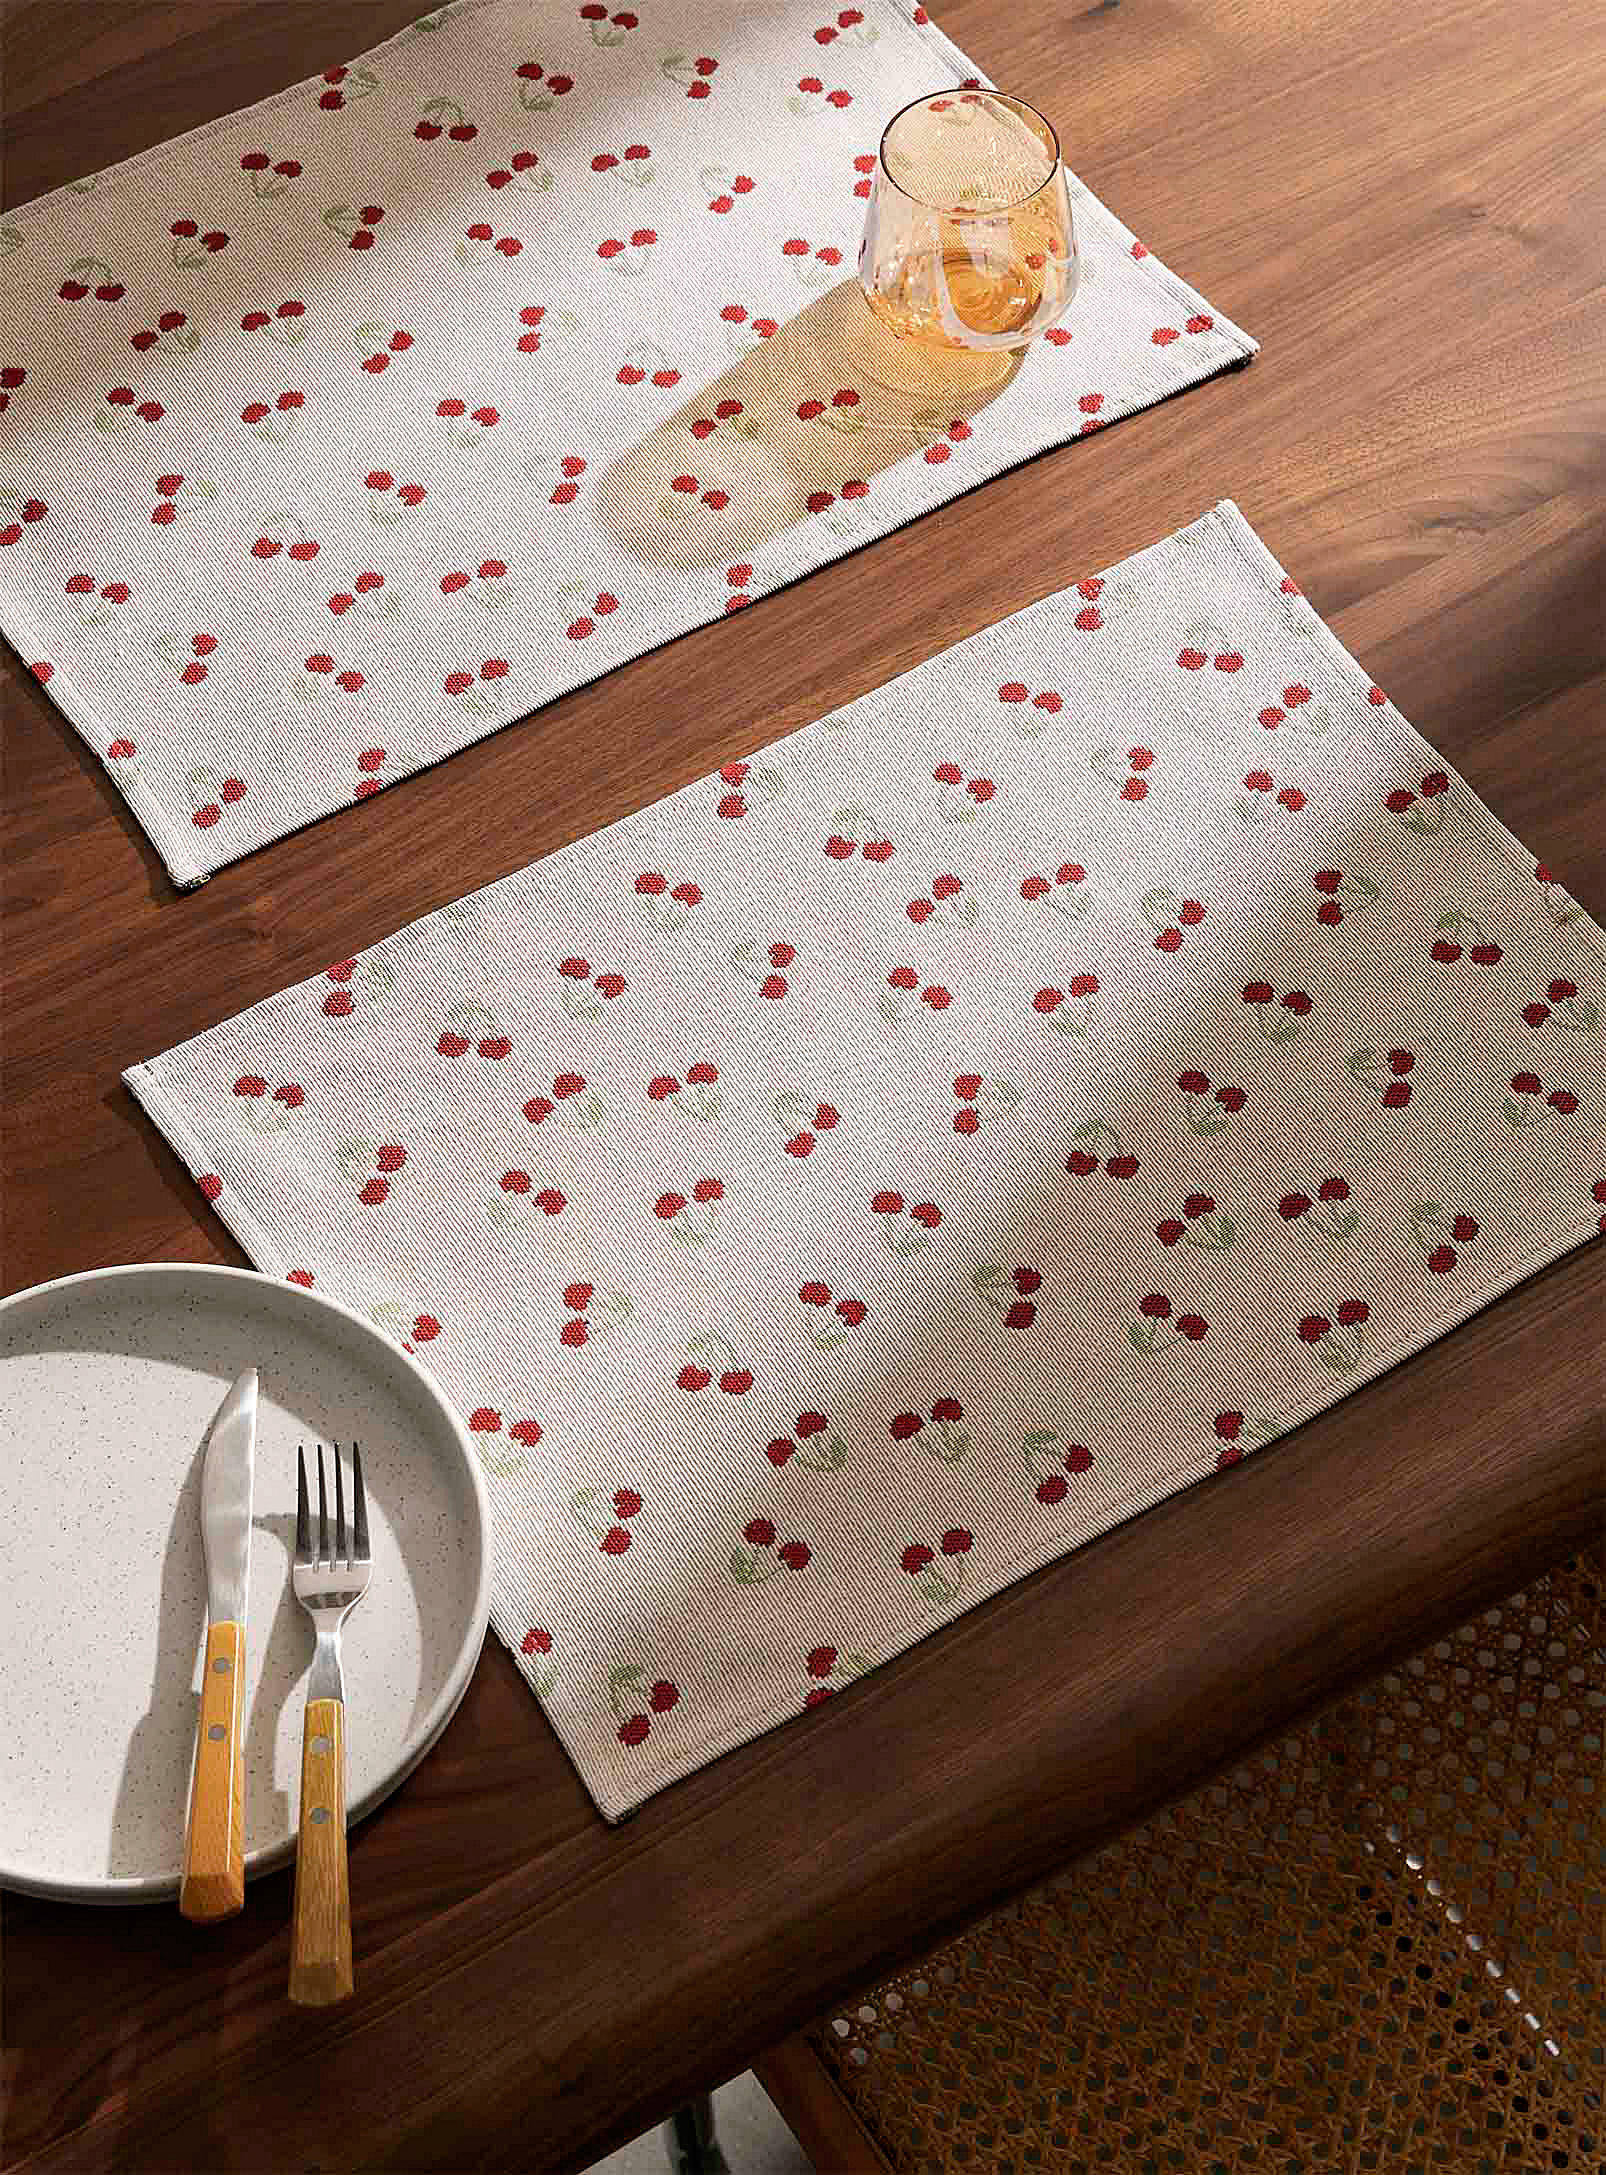 Simons Maison - Retro cherries tapestry placemats Set of 2